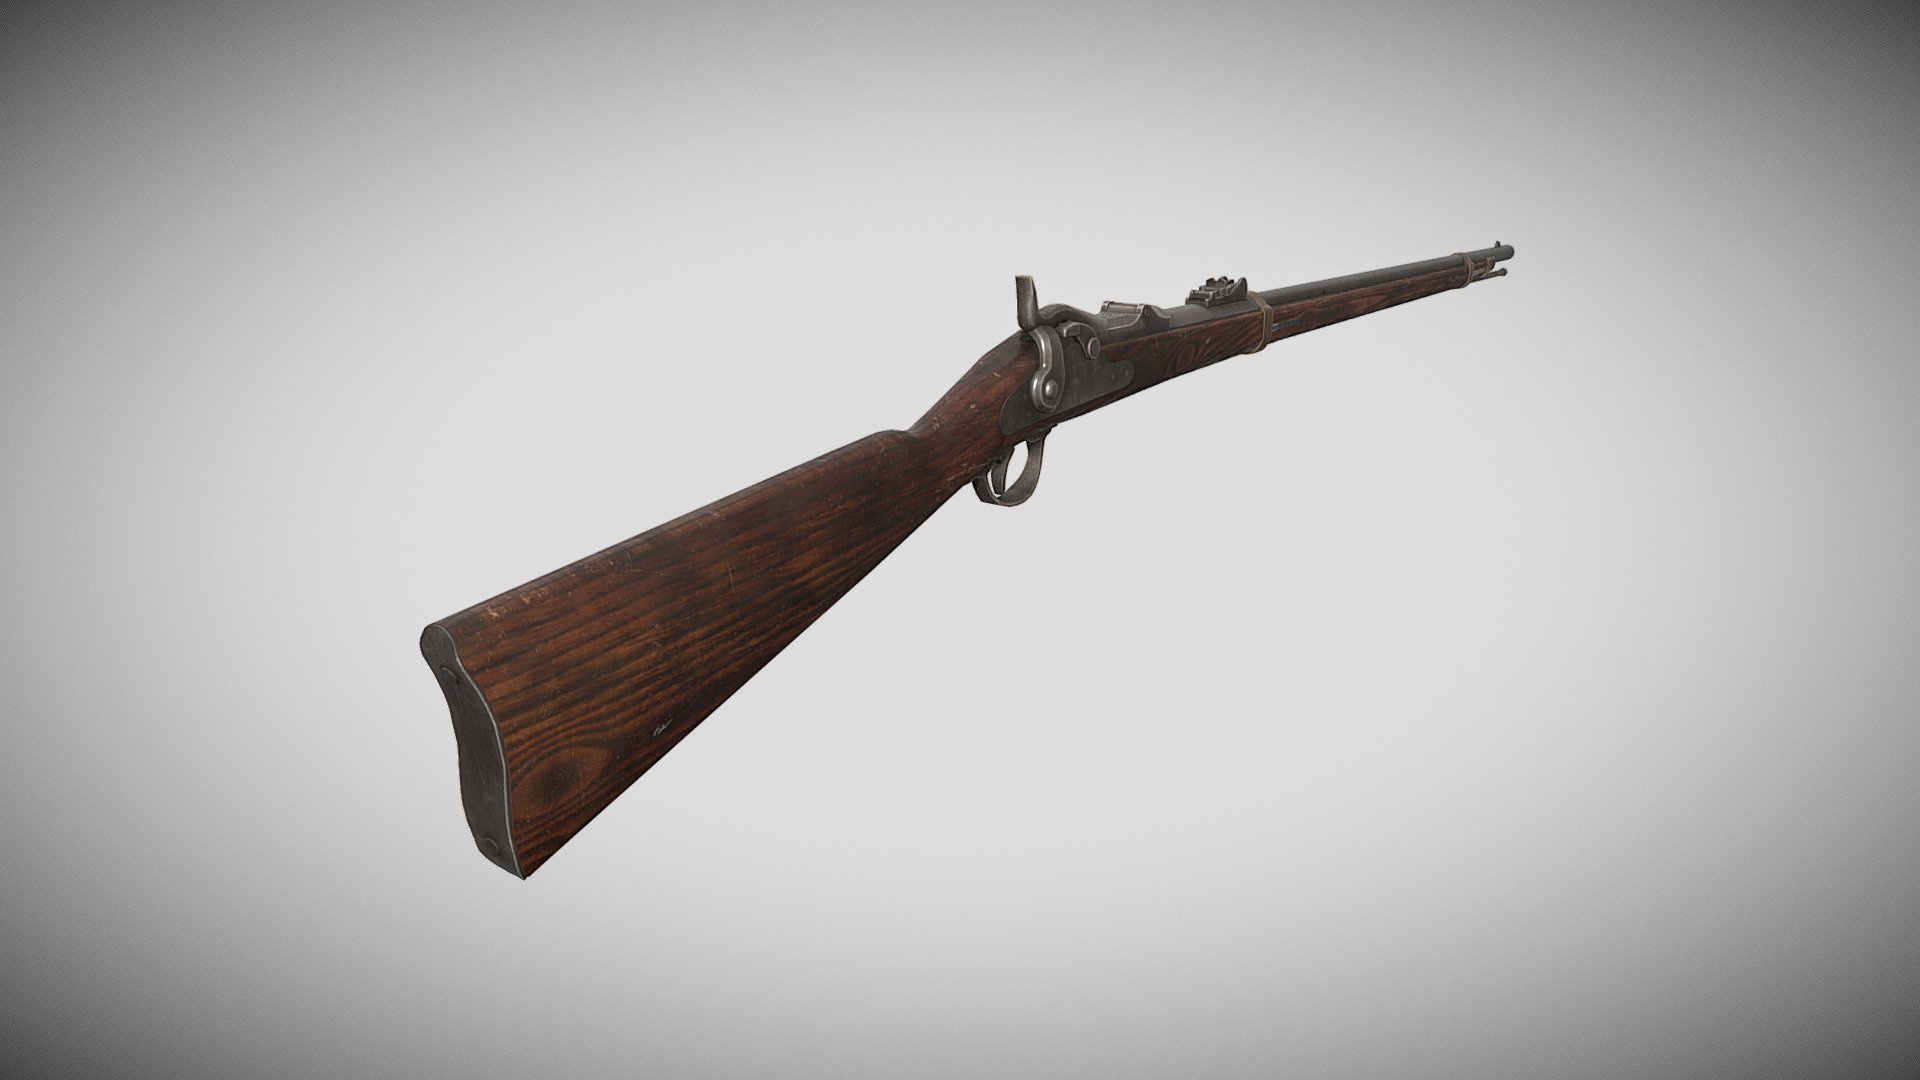 My links: https://linktr.ee/blueorchid3d

Model history:

The Springfield Model 1873 was the first standard-issue breech-loading rifle adopted by the United States Army (although the Springfield Model 1866 had seen limited issue to troops along the Bozeman Trail in 1867). The gun, in both full-length and carbine versions, was widely used in subsequent battles against Native Americans. 

Materials:





Stock




MetalParts



All material are PBR 4K resolution:





Diffuse




AO




Normal




Roughness




Metallic


 - Springfield M1873 - 3D model by BlueOrchid3D 3d model